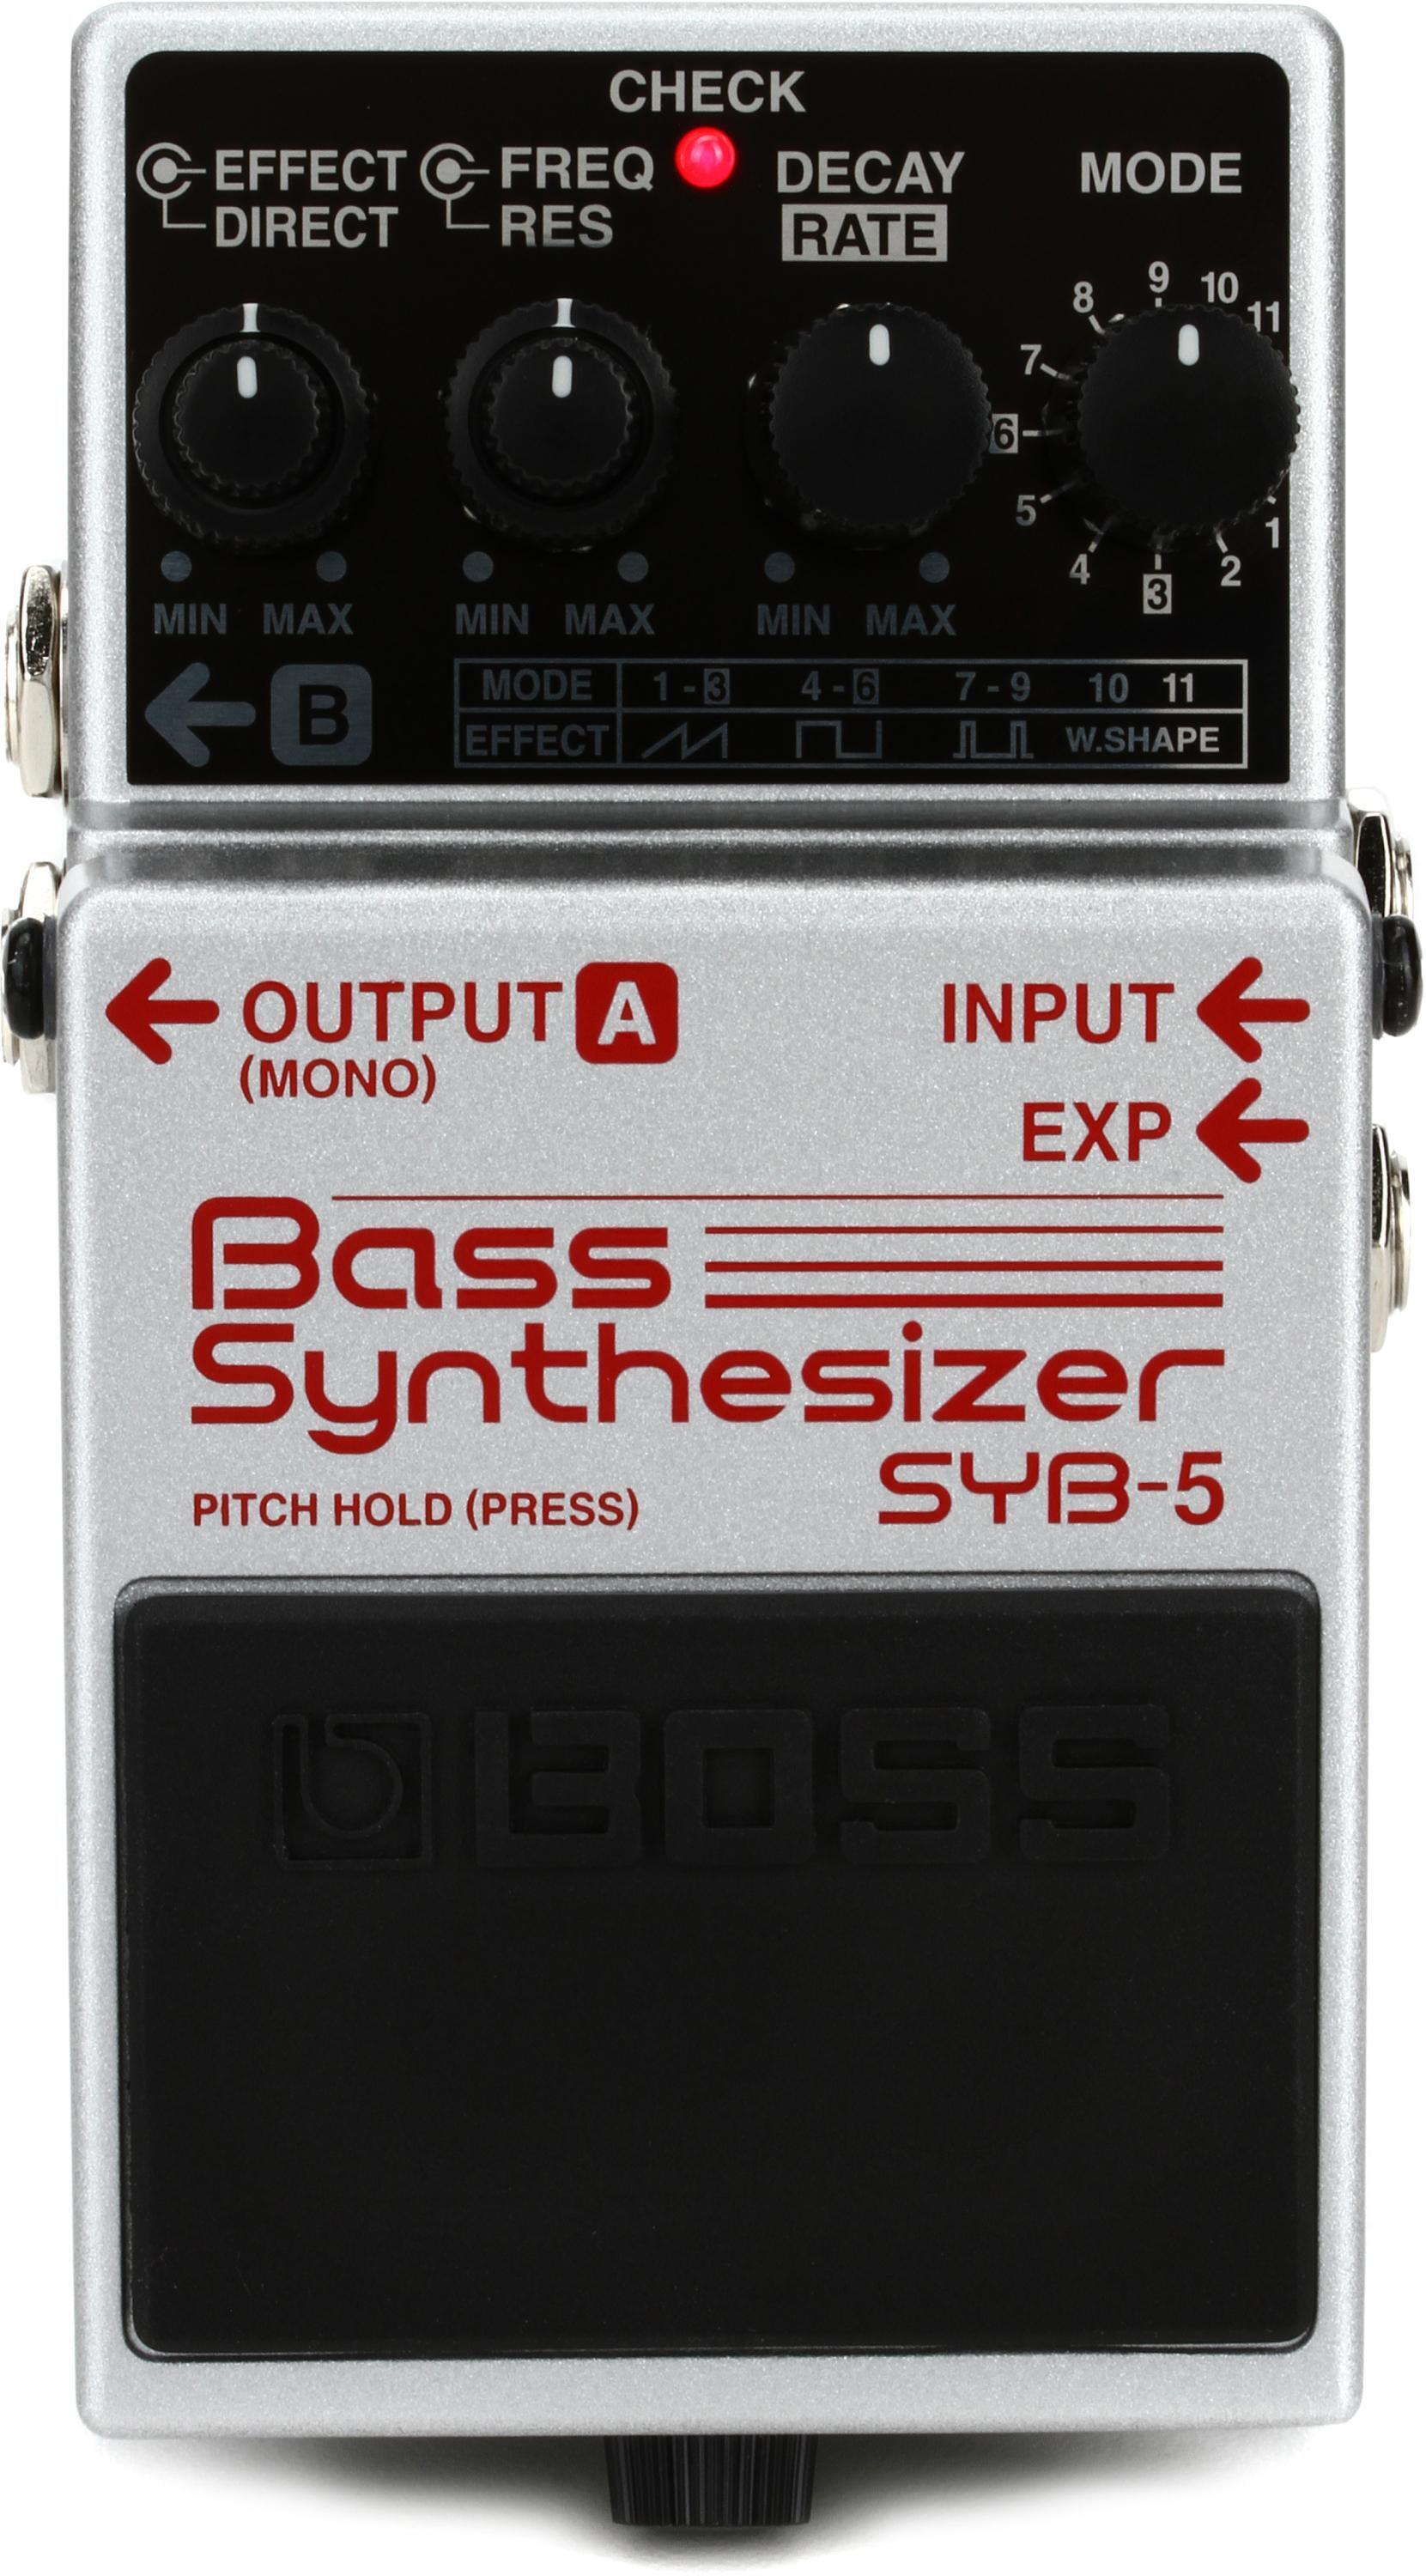 Boss SYB-5 Bass Synthesizer Pedal Reviews | Sweetwater